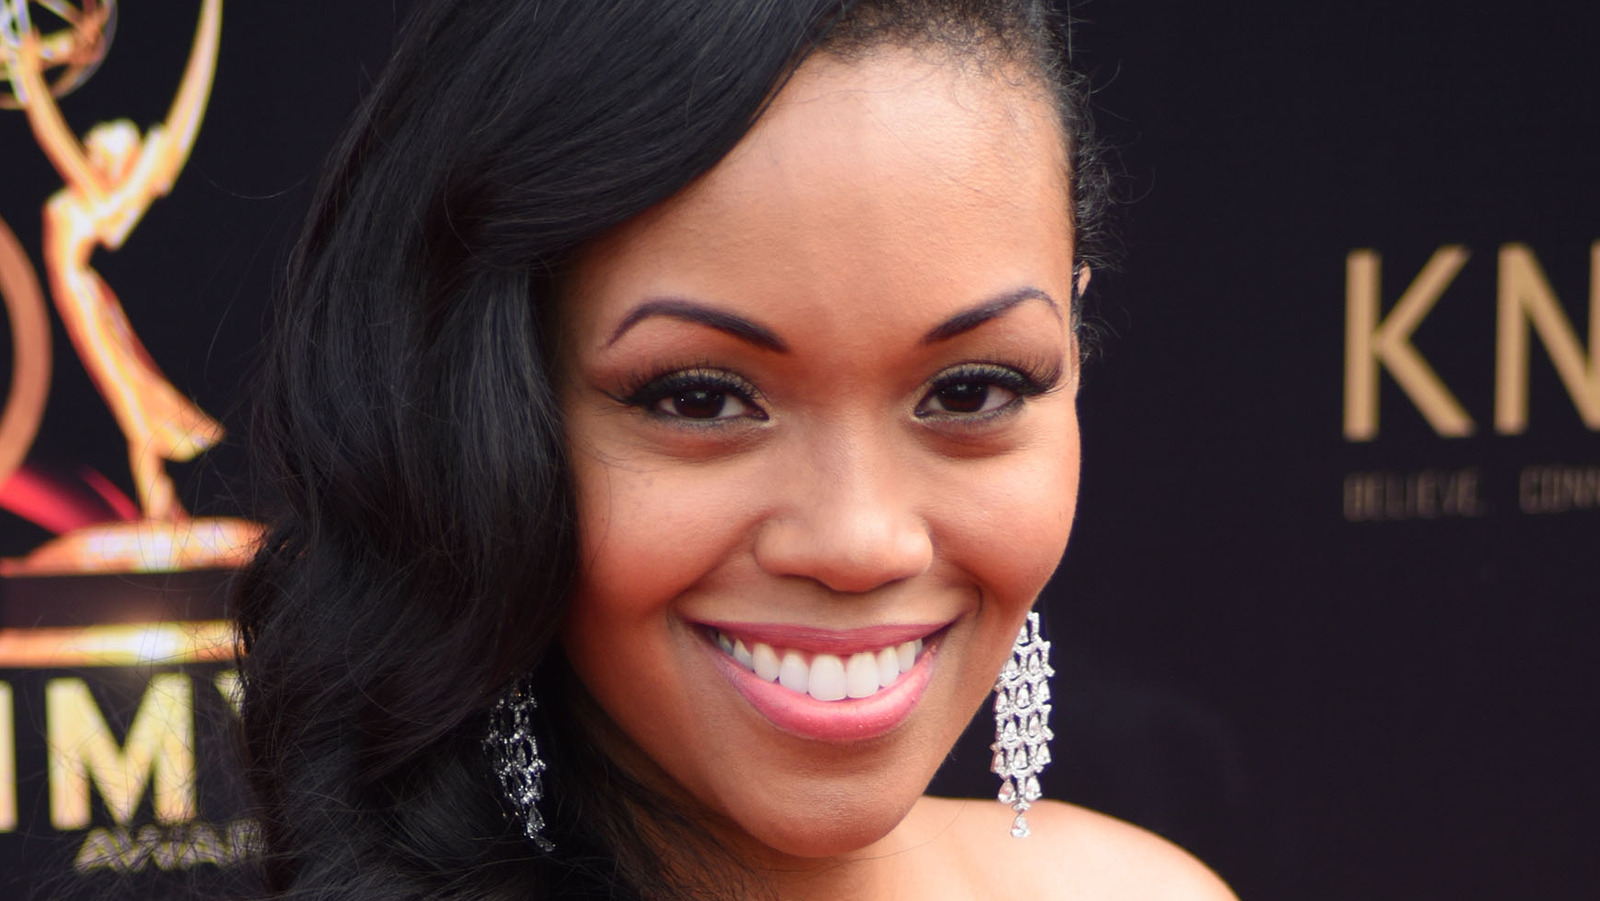 What You Don't Know About Mishael Morgan